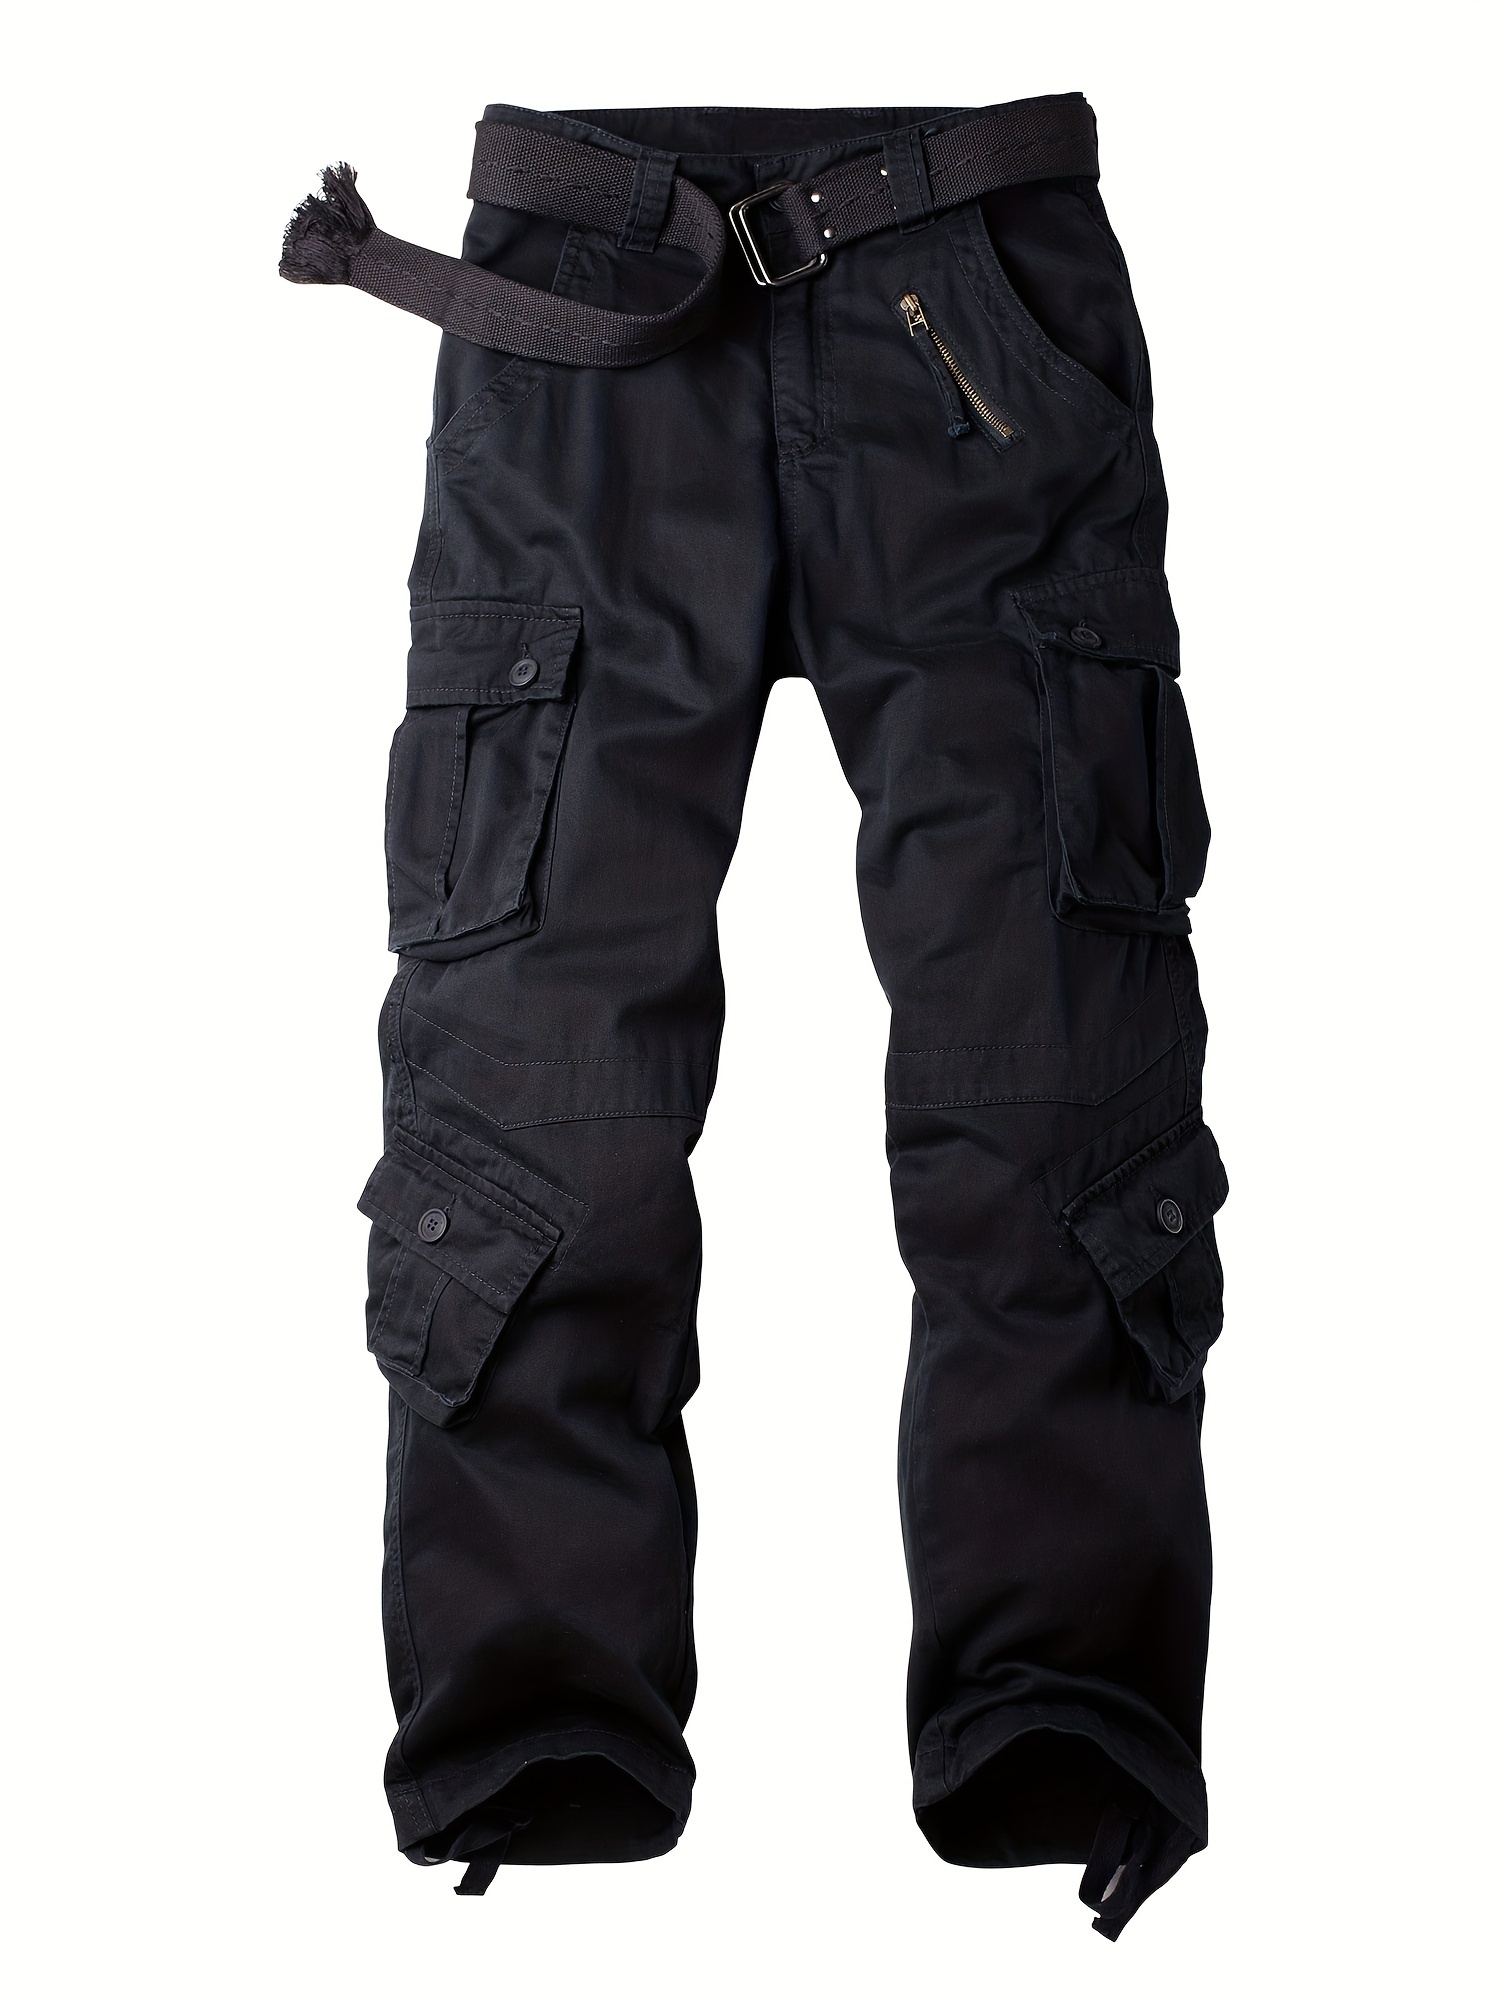 Ladies Cargo Combat Work Trousers Size 6 to 26 in Black or Navy By SITE KING